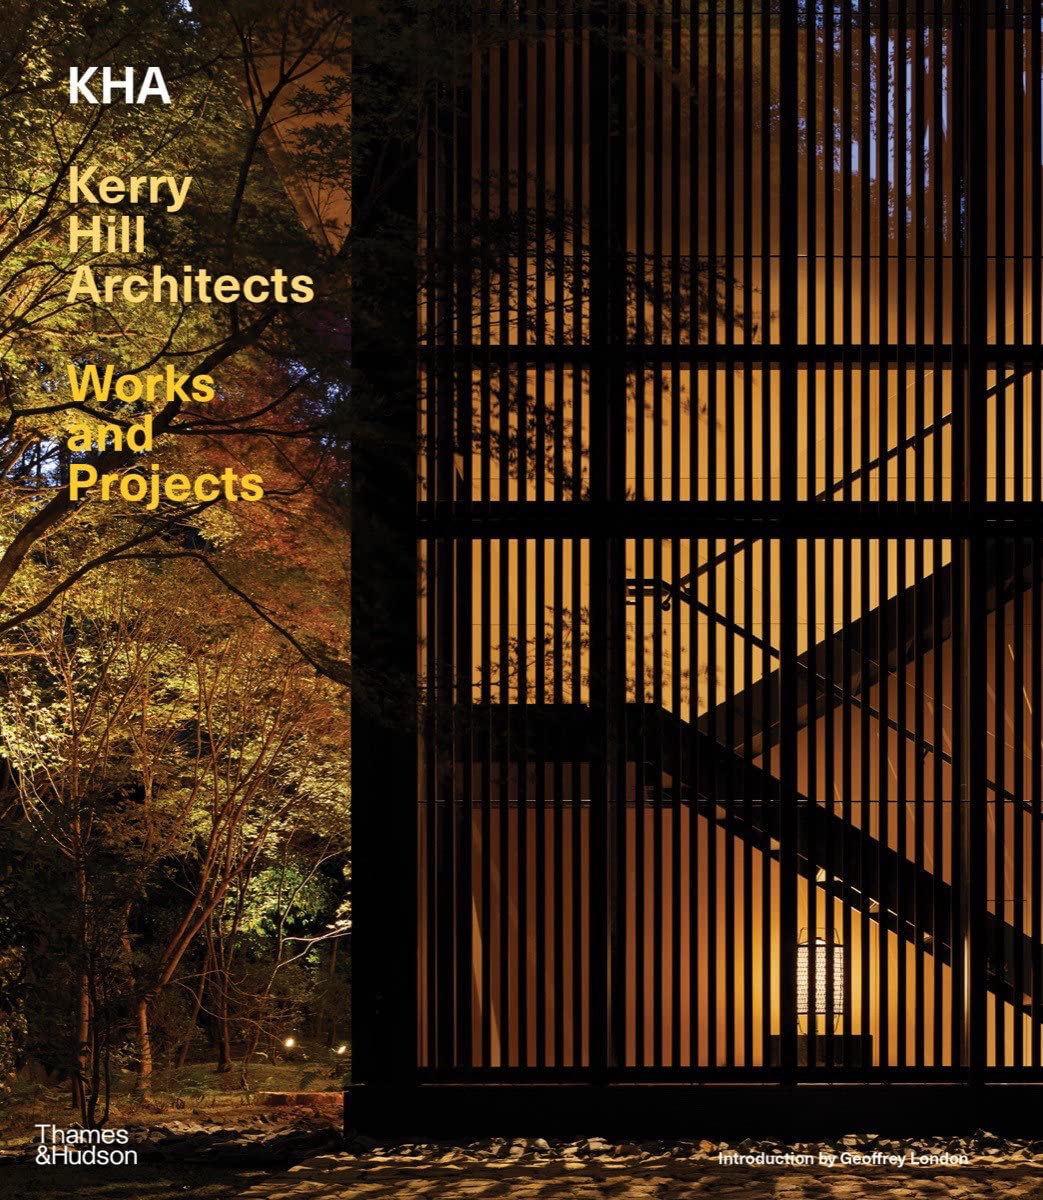 Work and Projects - Kerry Hill Architects